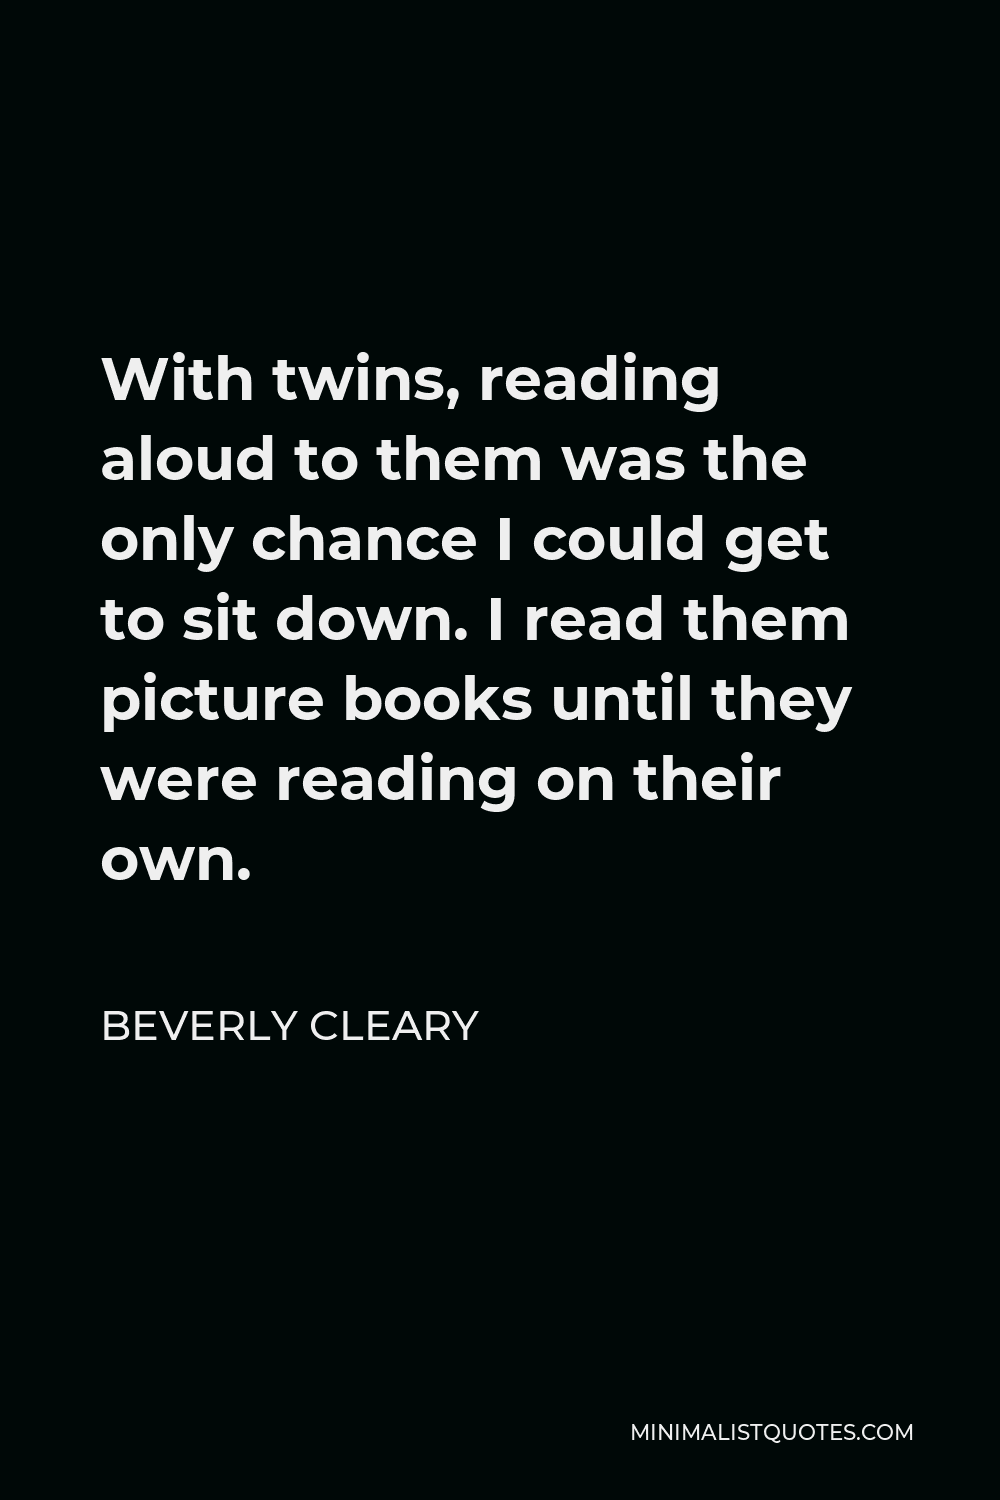 Beverly Cleary Quote - With twins, reading aloud to them was the only chance I could get to sit down. I read them picture books until they were reading on their own.